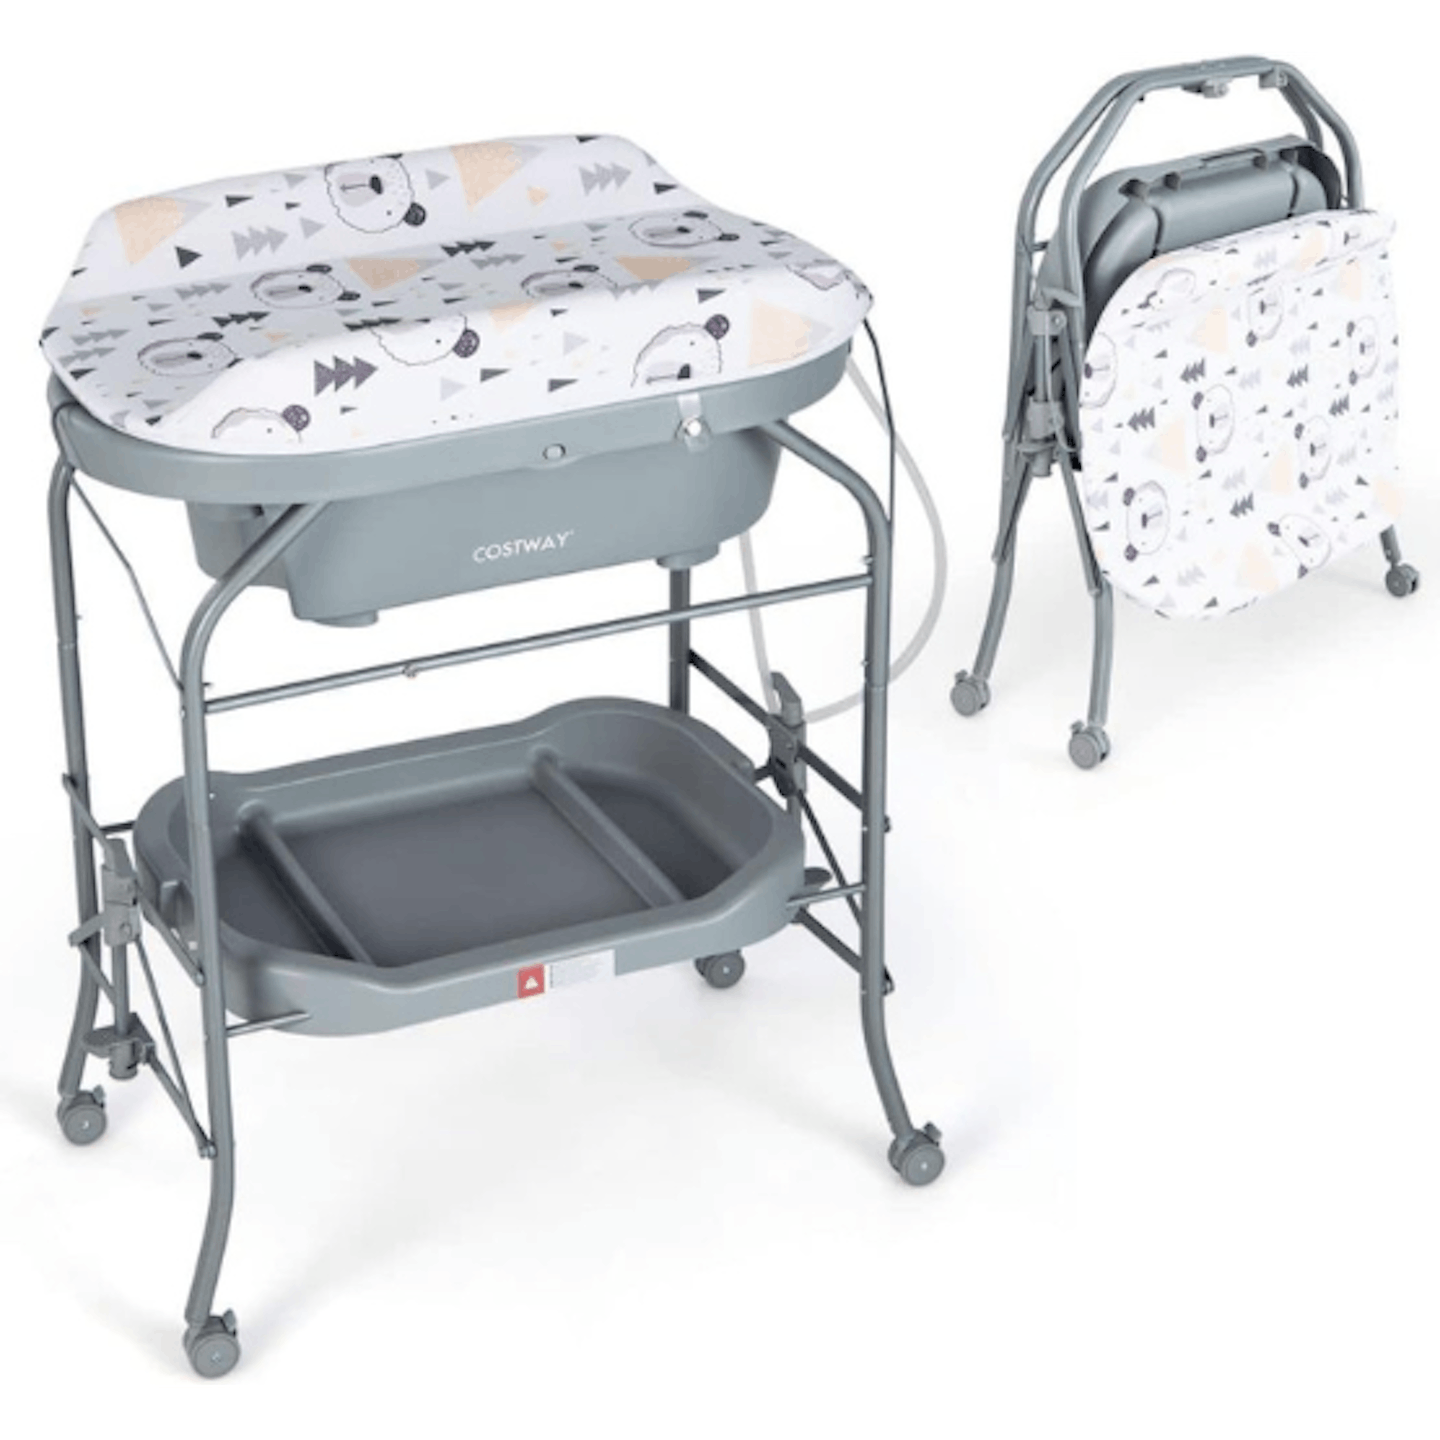 Costway folding changing table